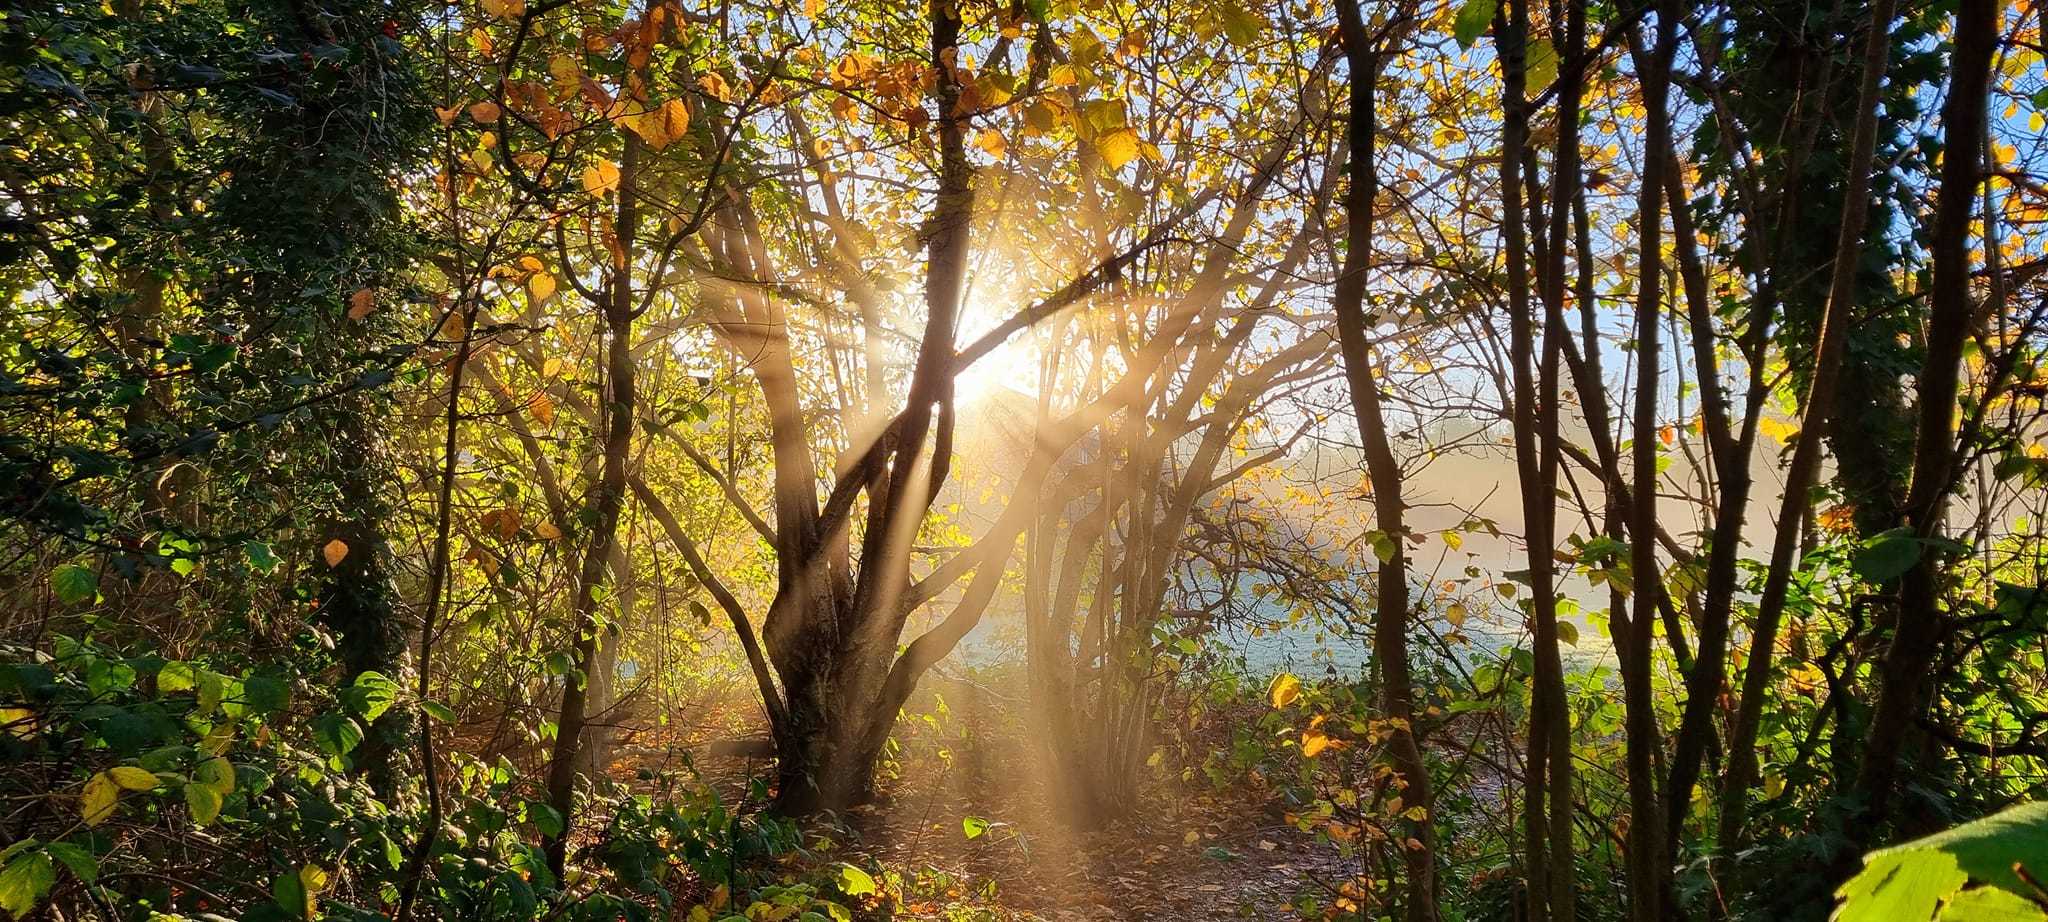 Sunshine through the trees by Mike Horton